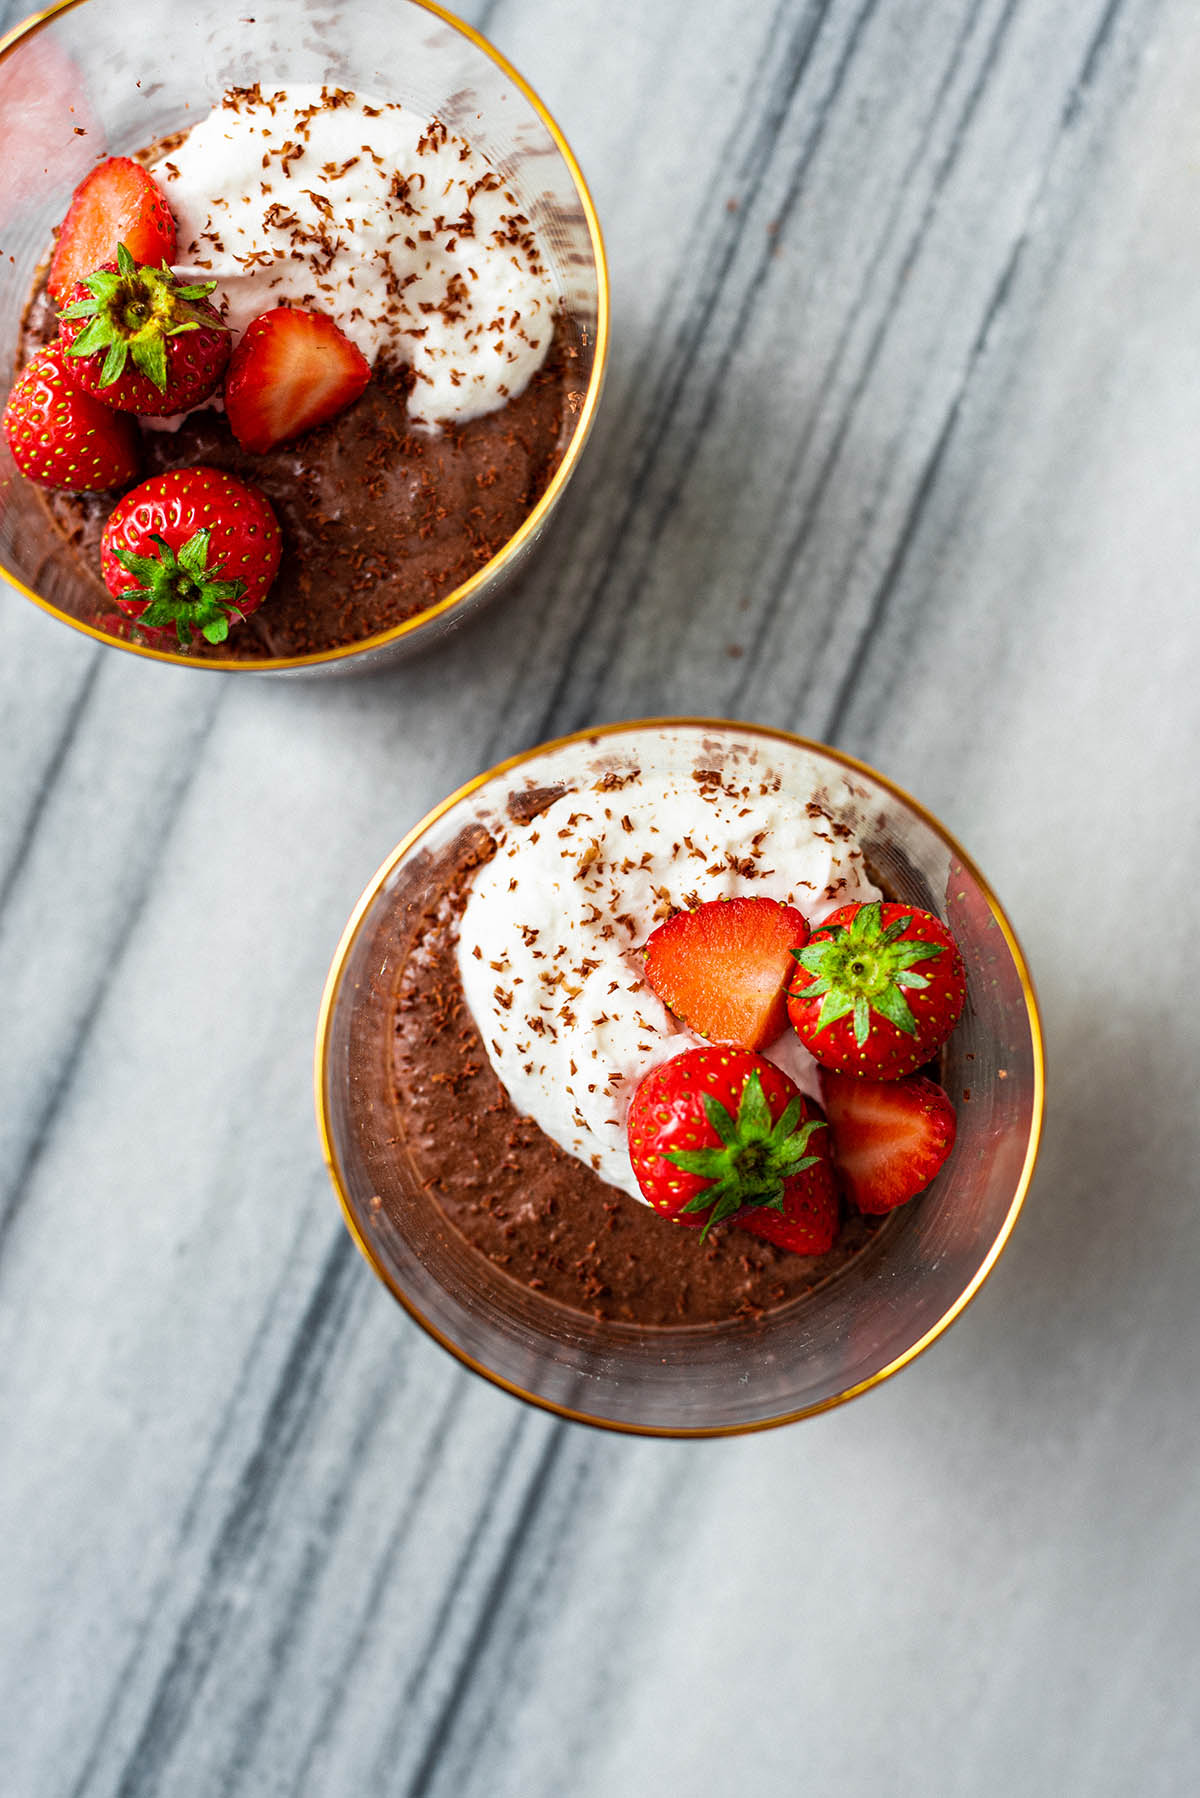 Chocolate chia mousse in two a glasses with whipped cream and strawberries.